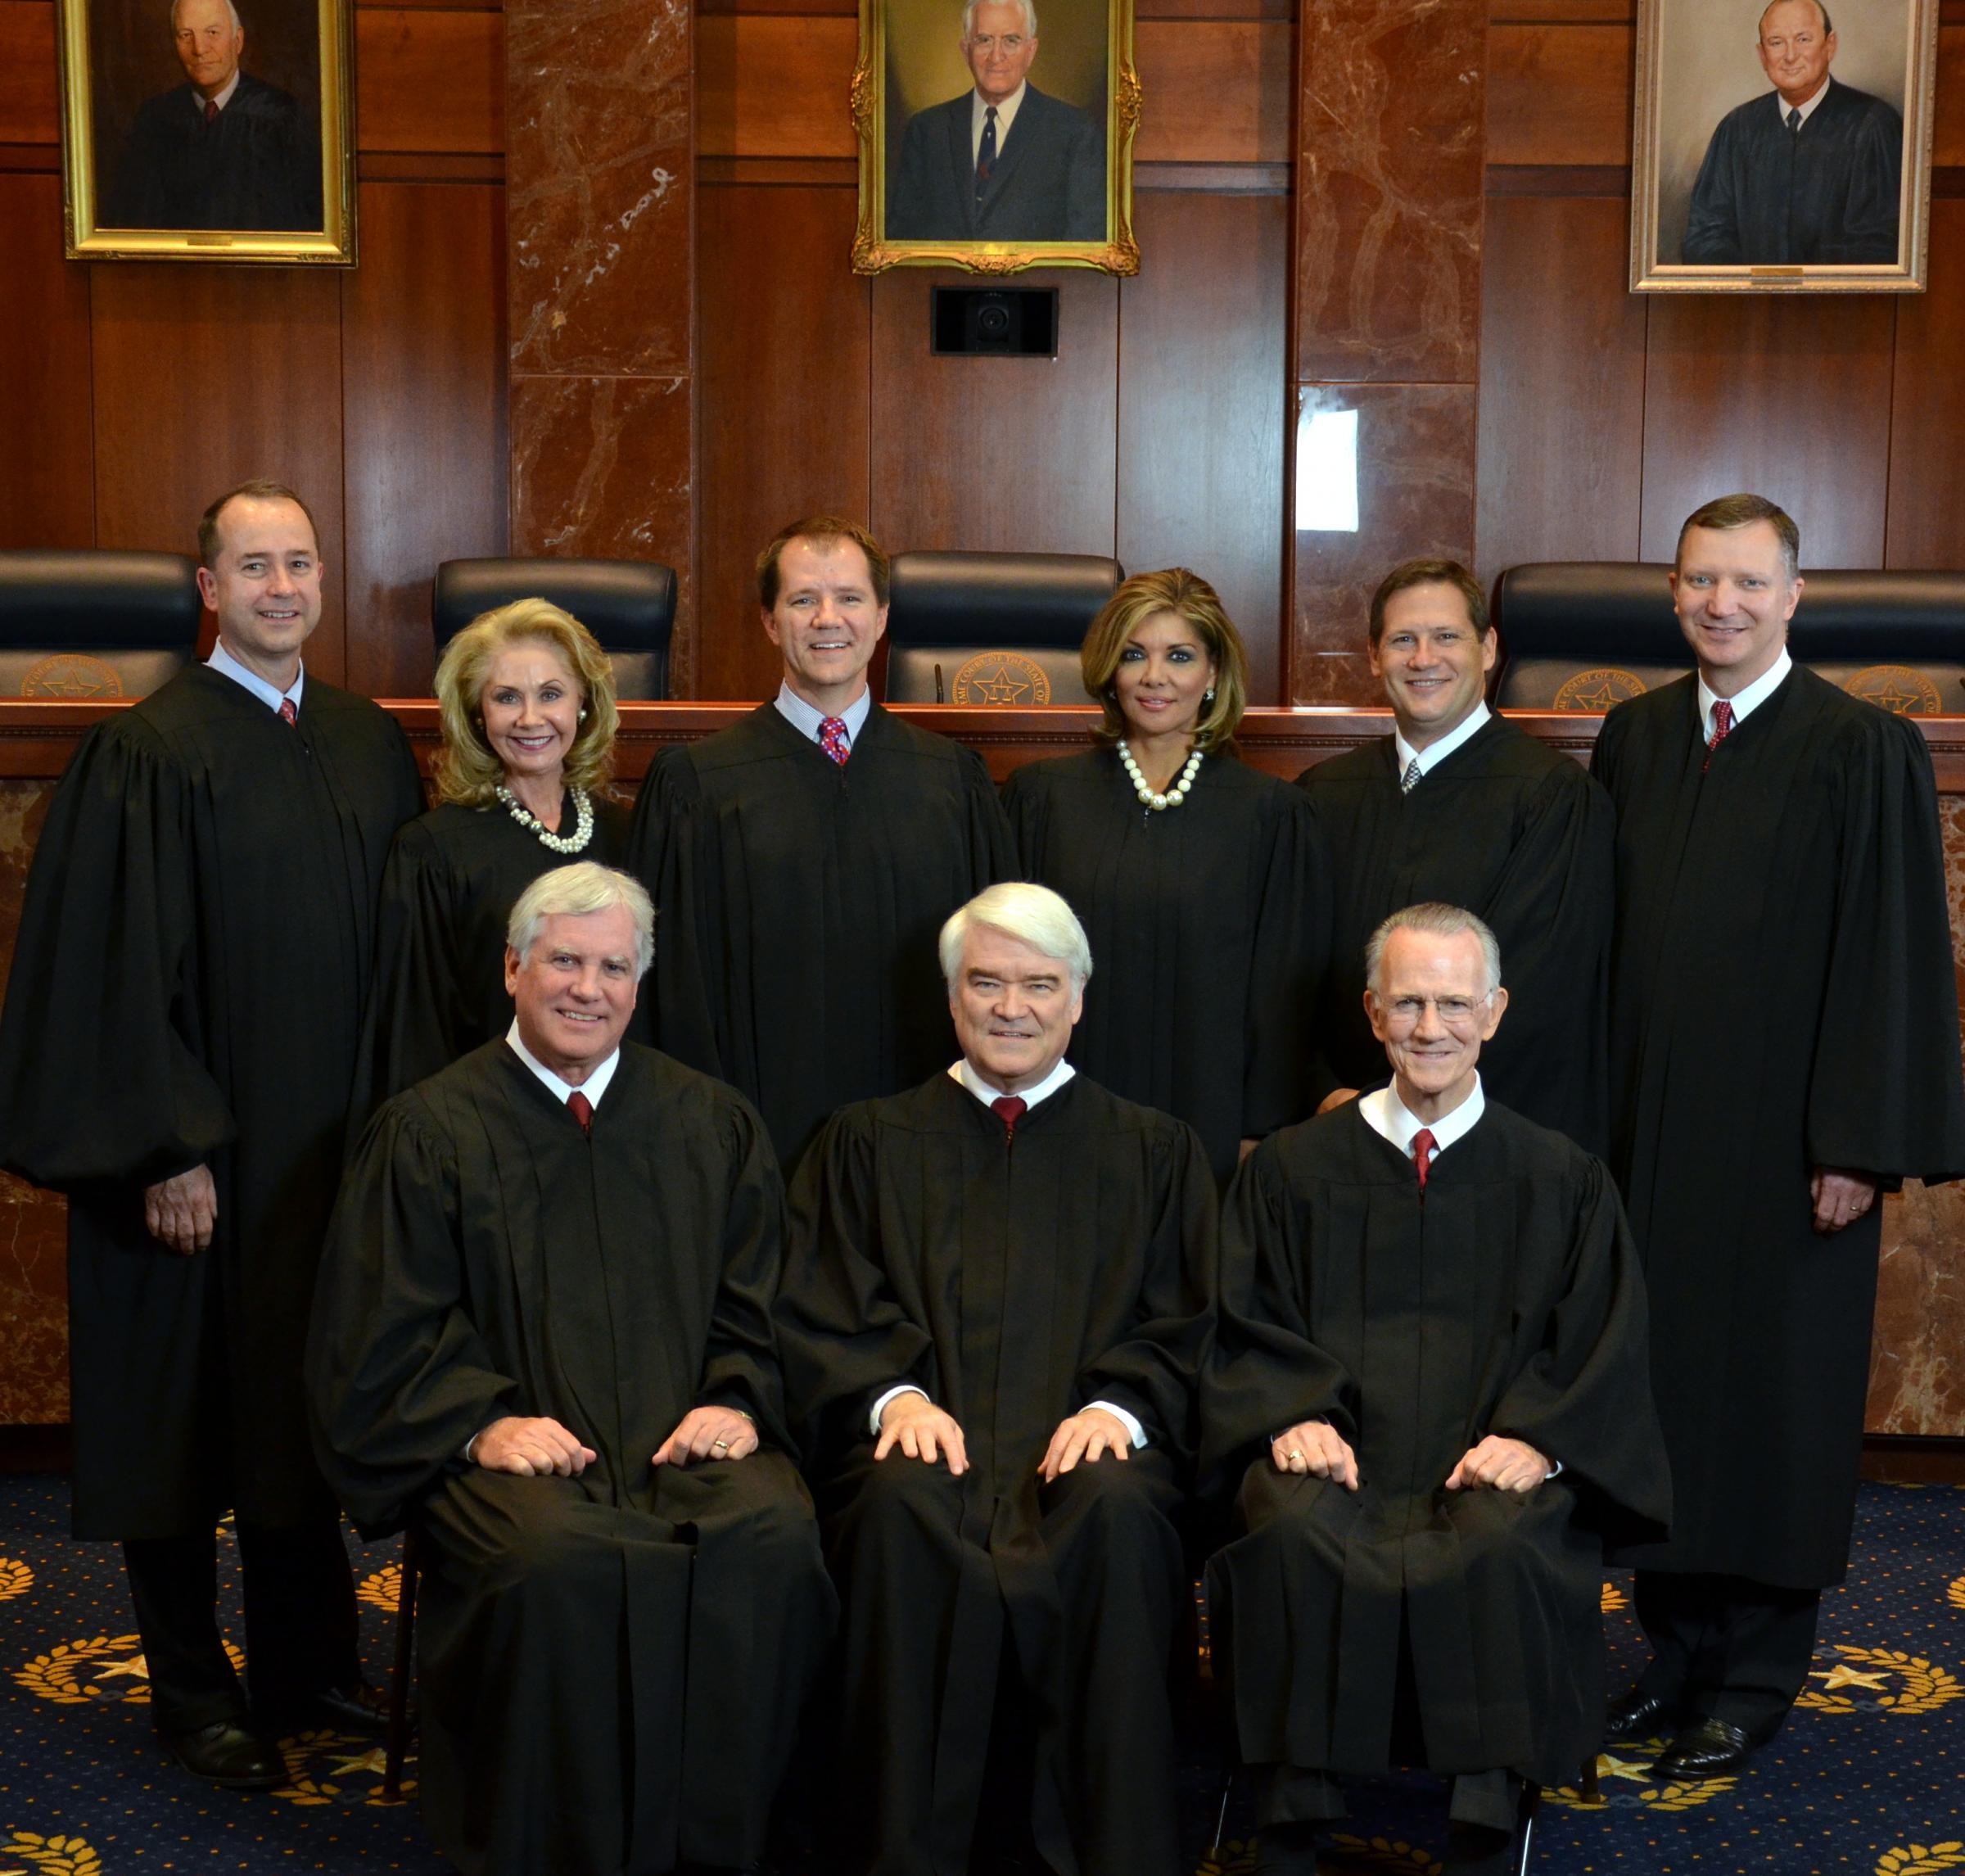 Texas Supreme Court Logo - Texas Supreme Court Hears From Competing Waste Companies